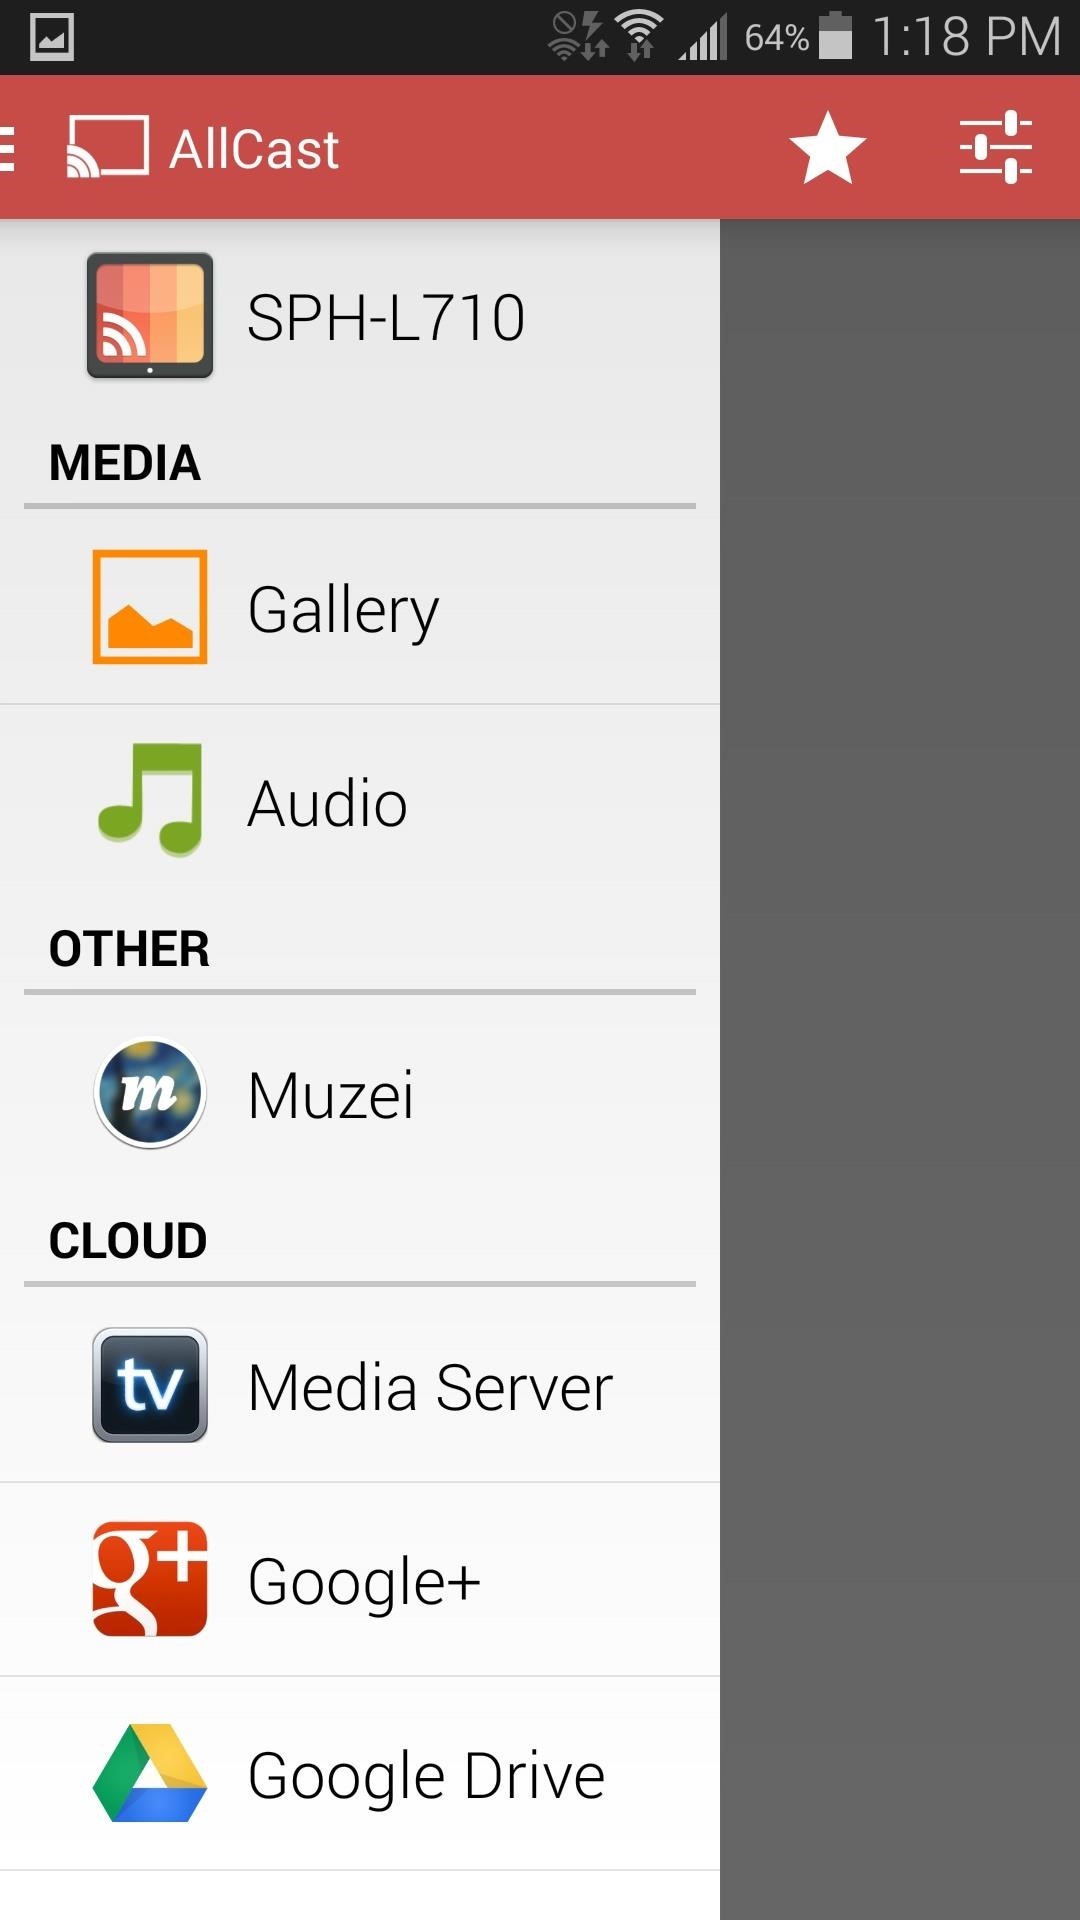 How to Turn an Old Galaxy S3 or Other Android Device into a Streaming Media Player